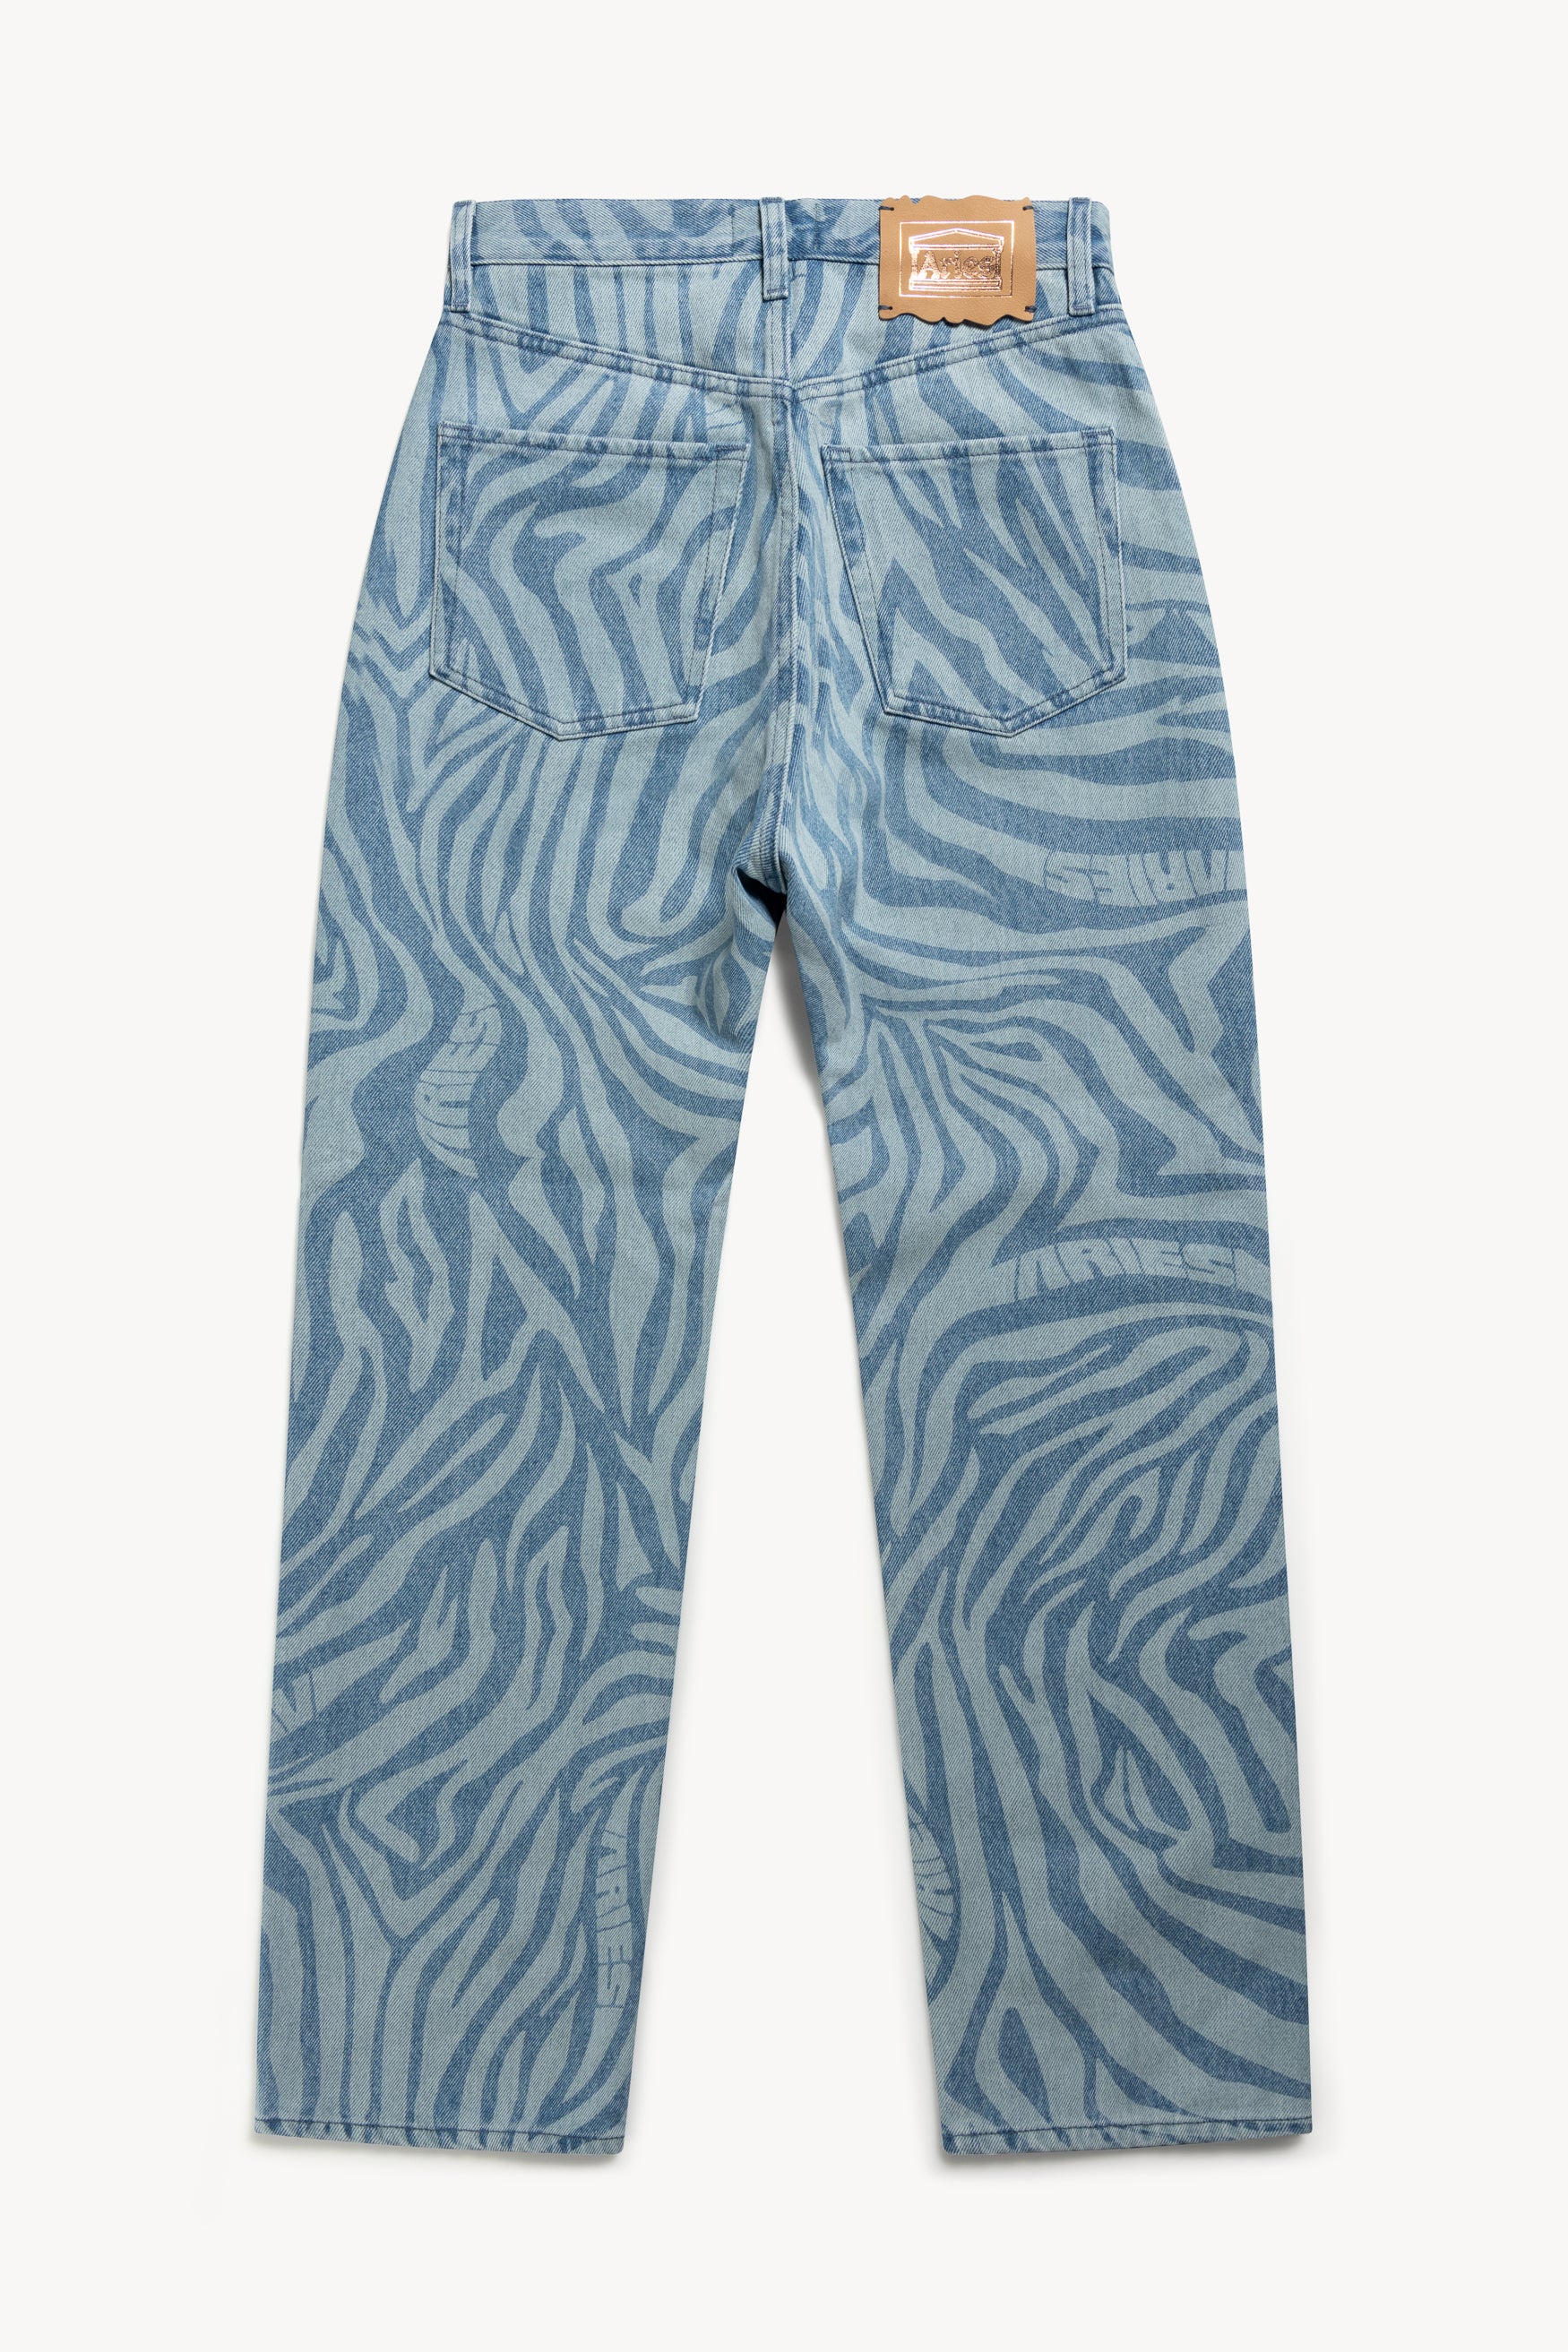 Load image into Gallery viewer, Zebra Print Lilly Jean